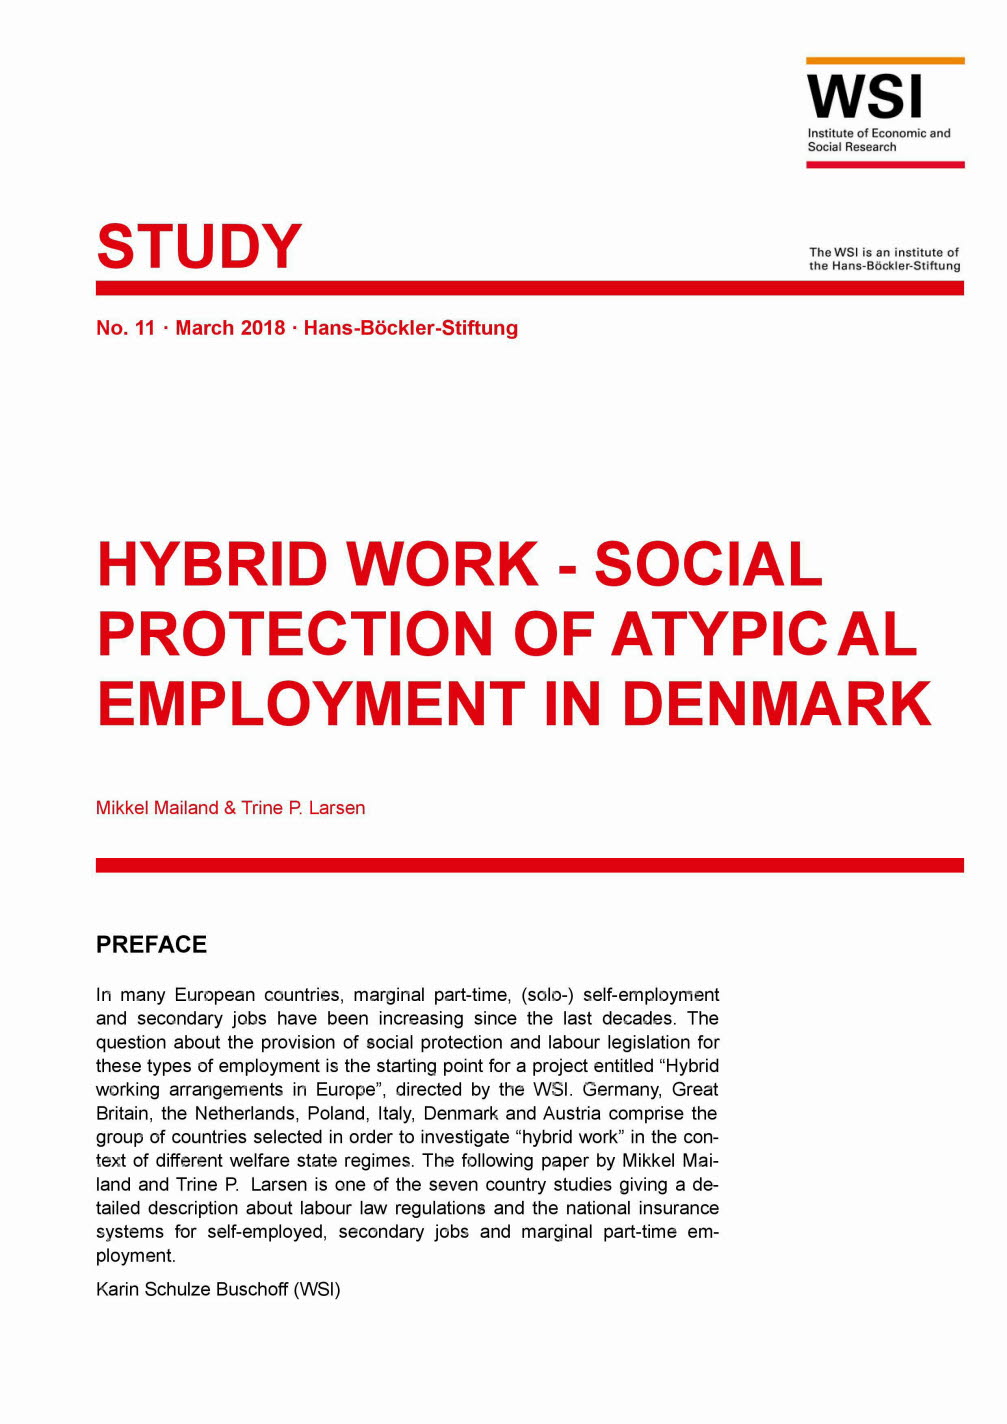 Hybrid work - social protection of atypical employment in Denmark